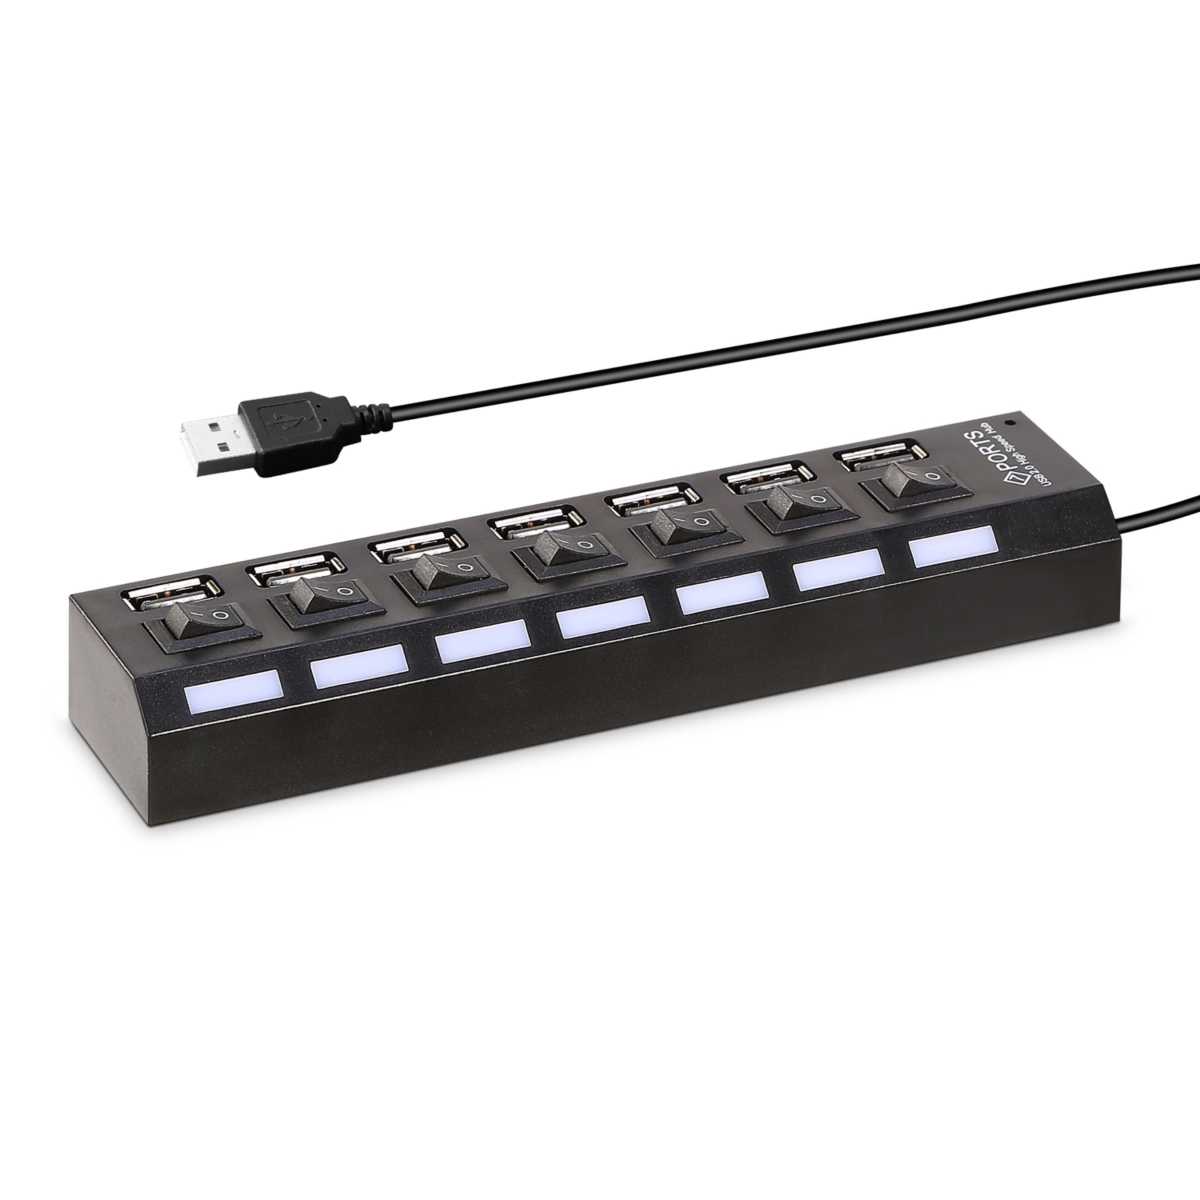 FFF-GPCT450 7 Port USB 2.0 Hub - High Speed Multiport with Individual Switches and LEDs -  Fresh Fab Finds